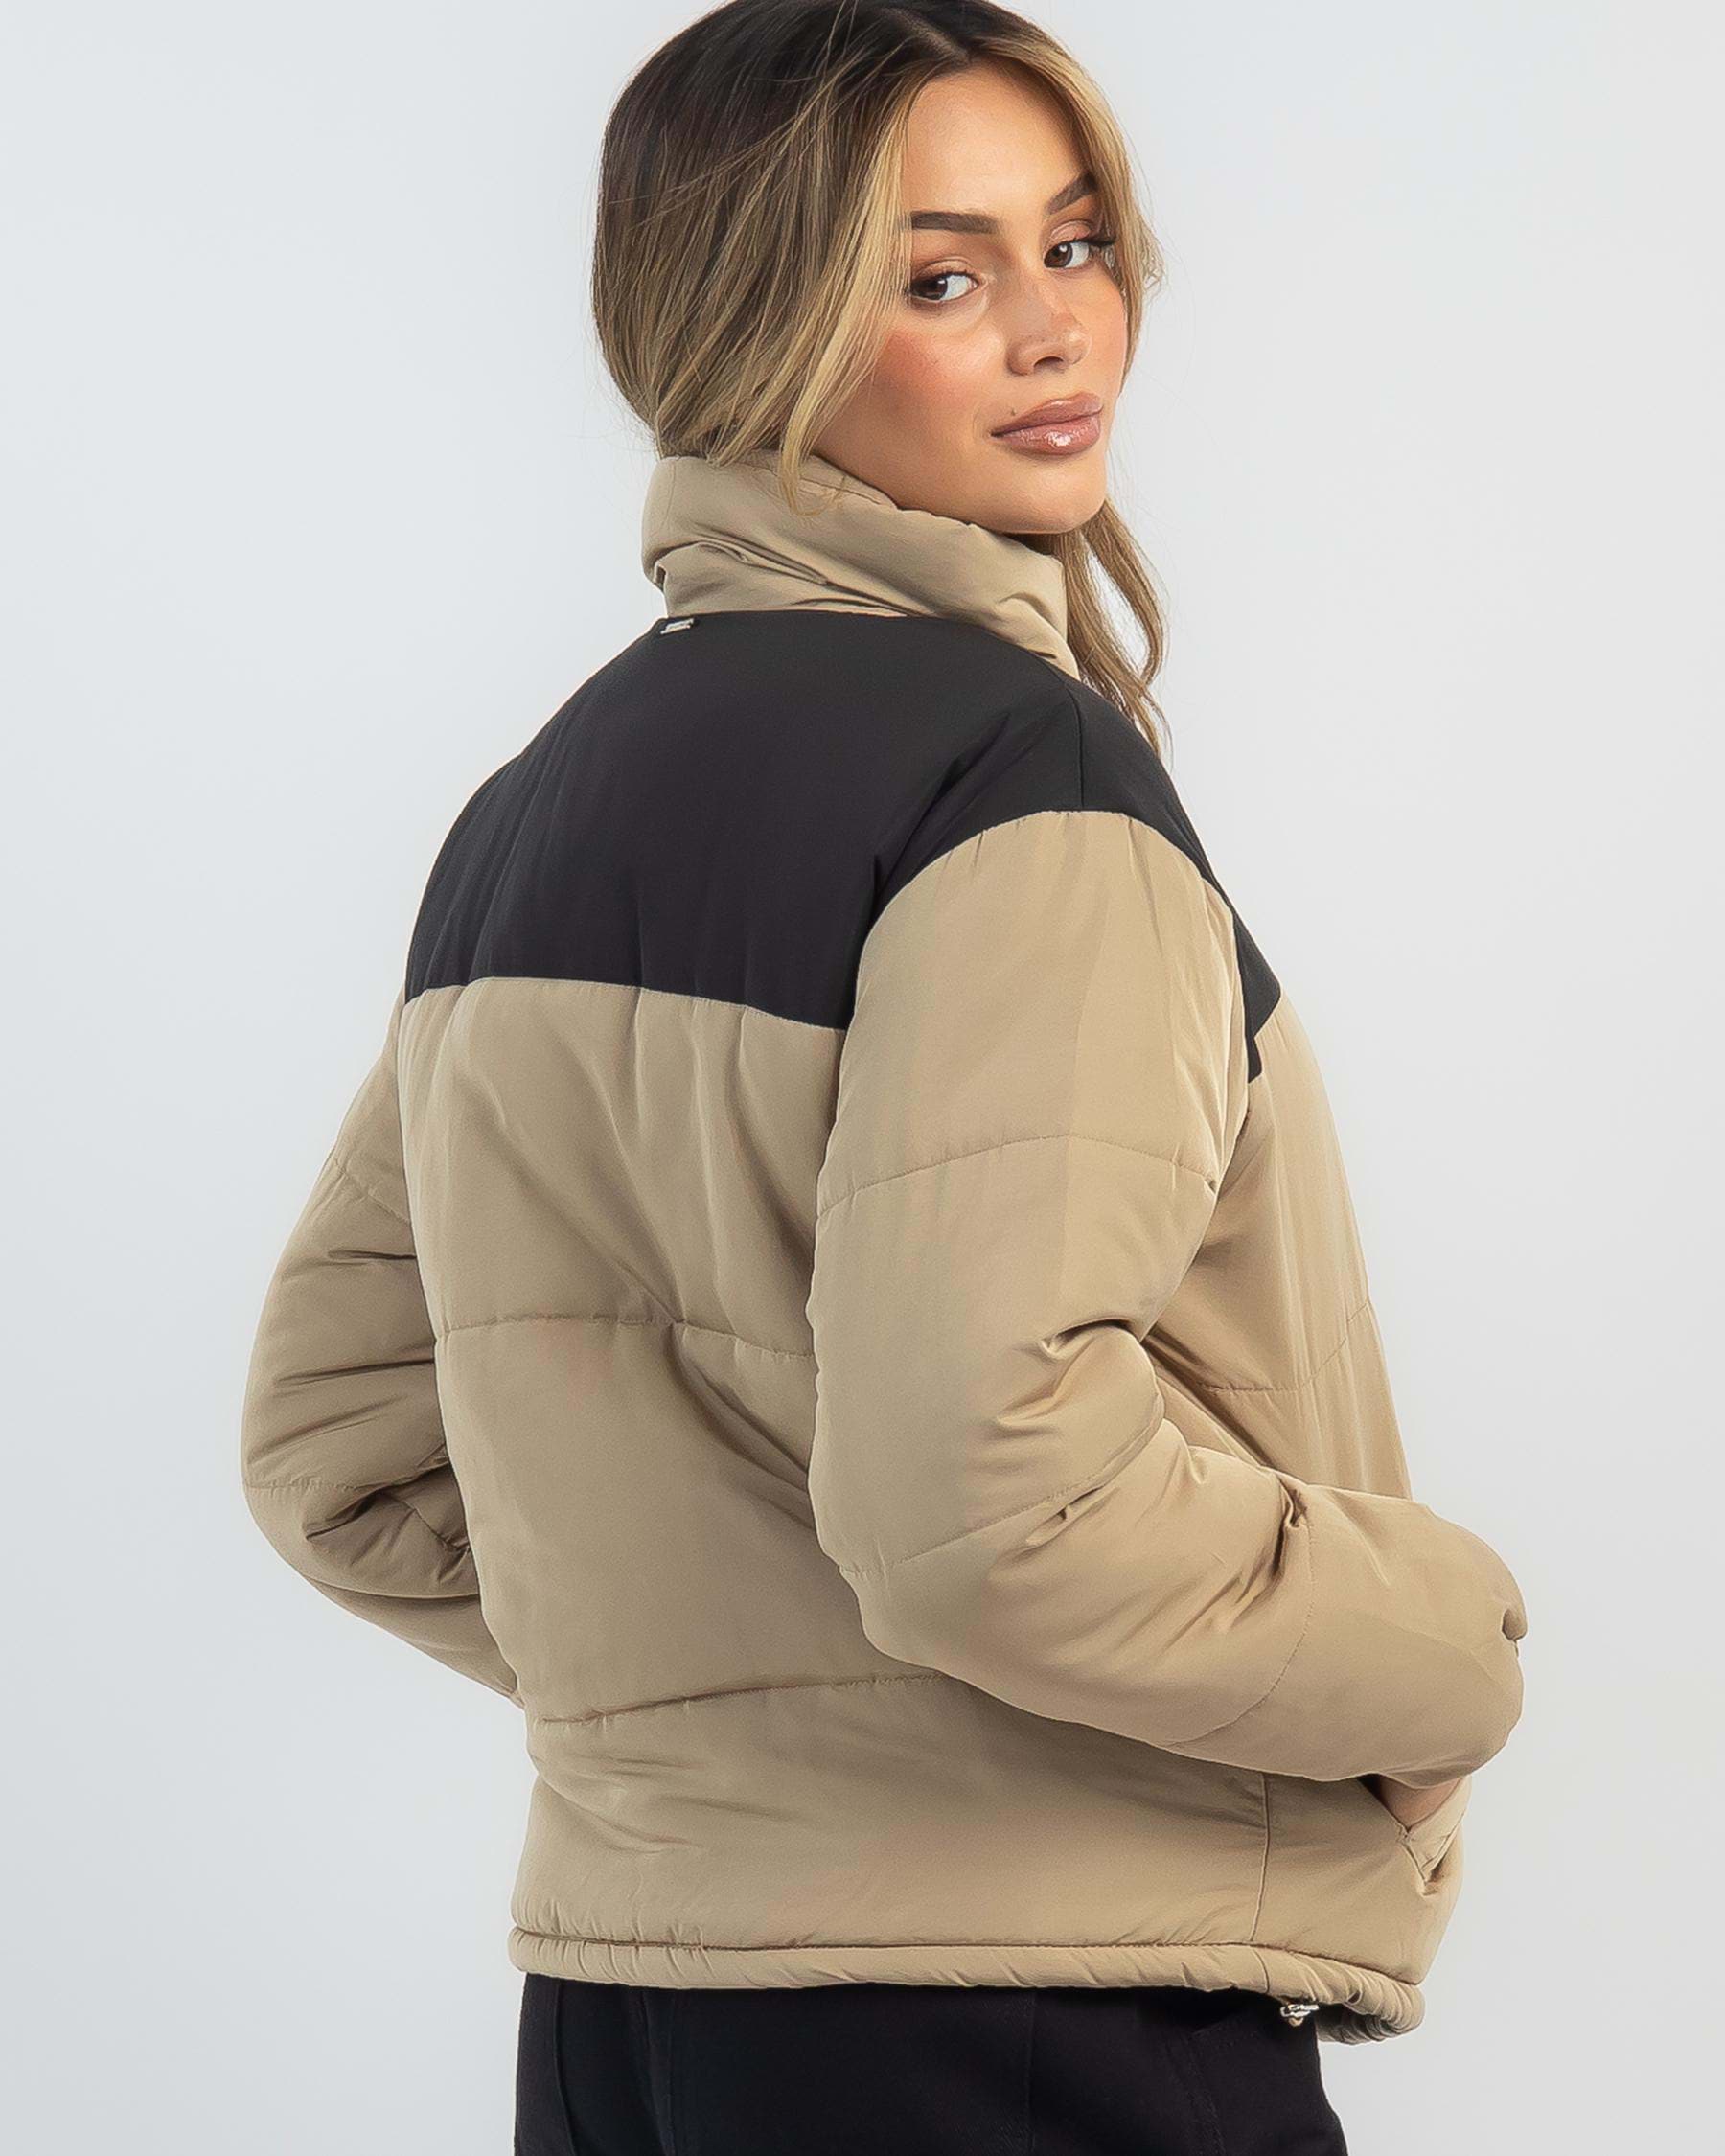 Ava And Ever Munich Puffer Jacket In Coffee/black - Fast Shipping ...